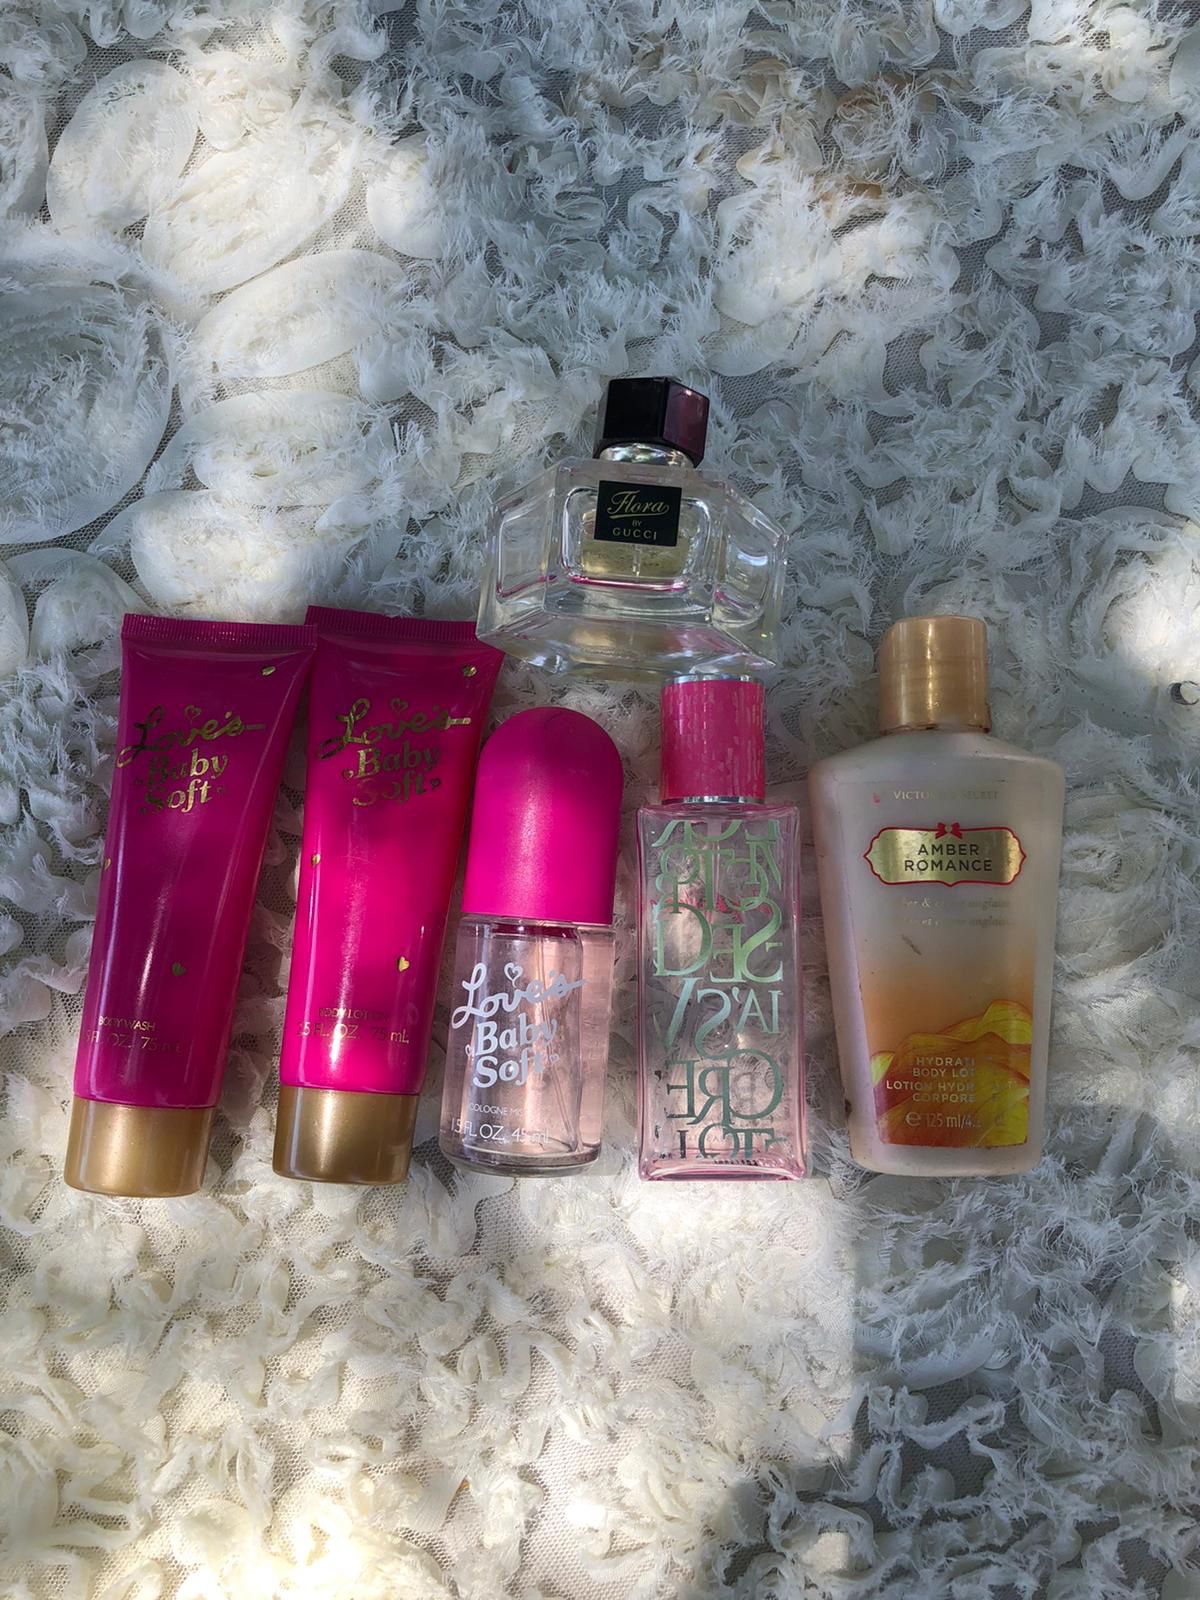 Women’s Perfumes and lotions